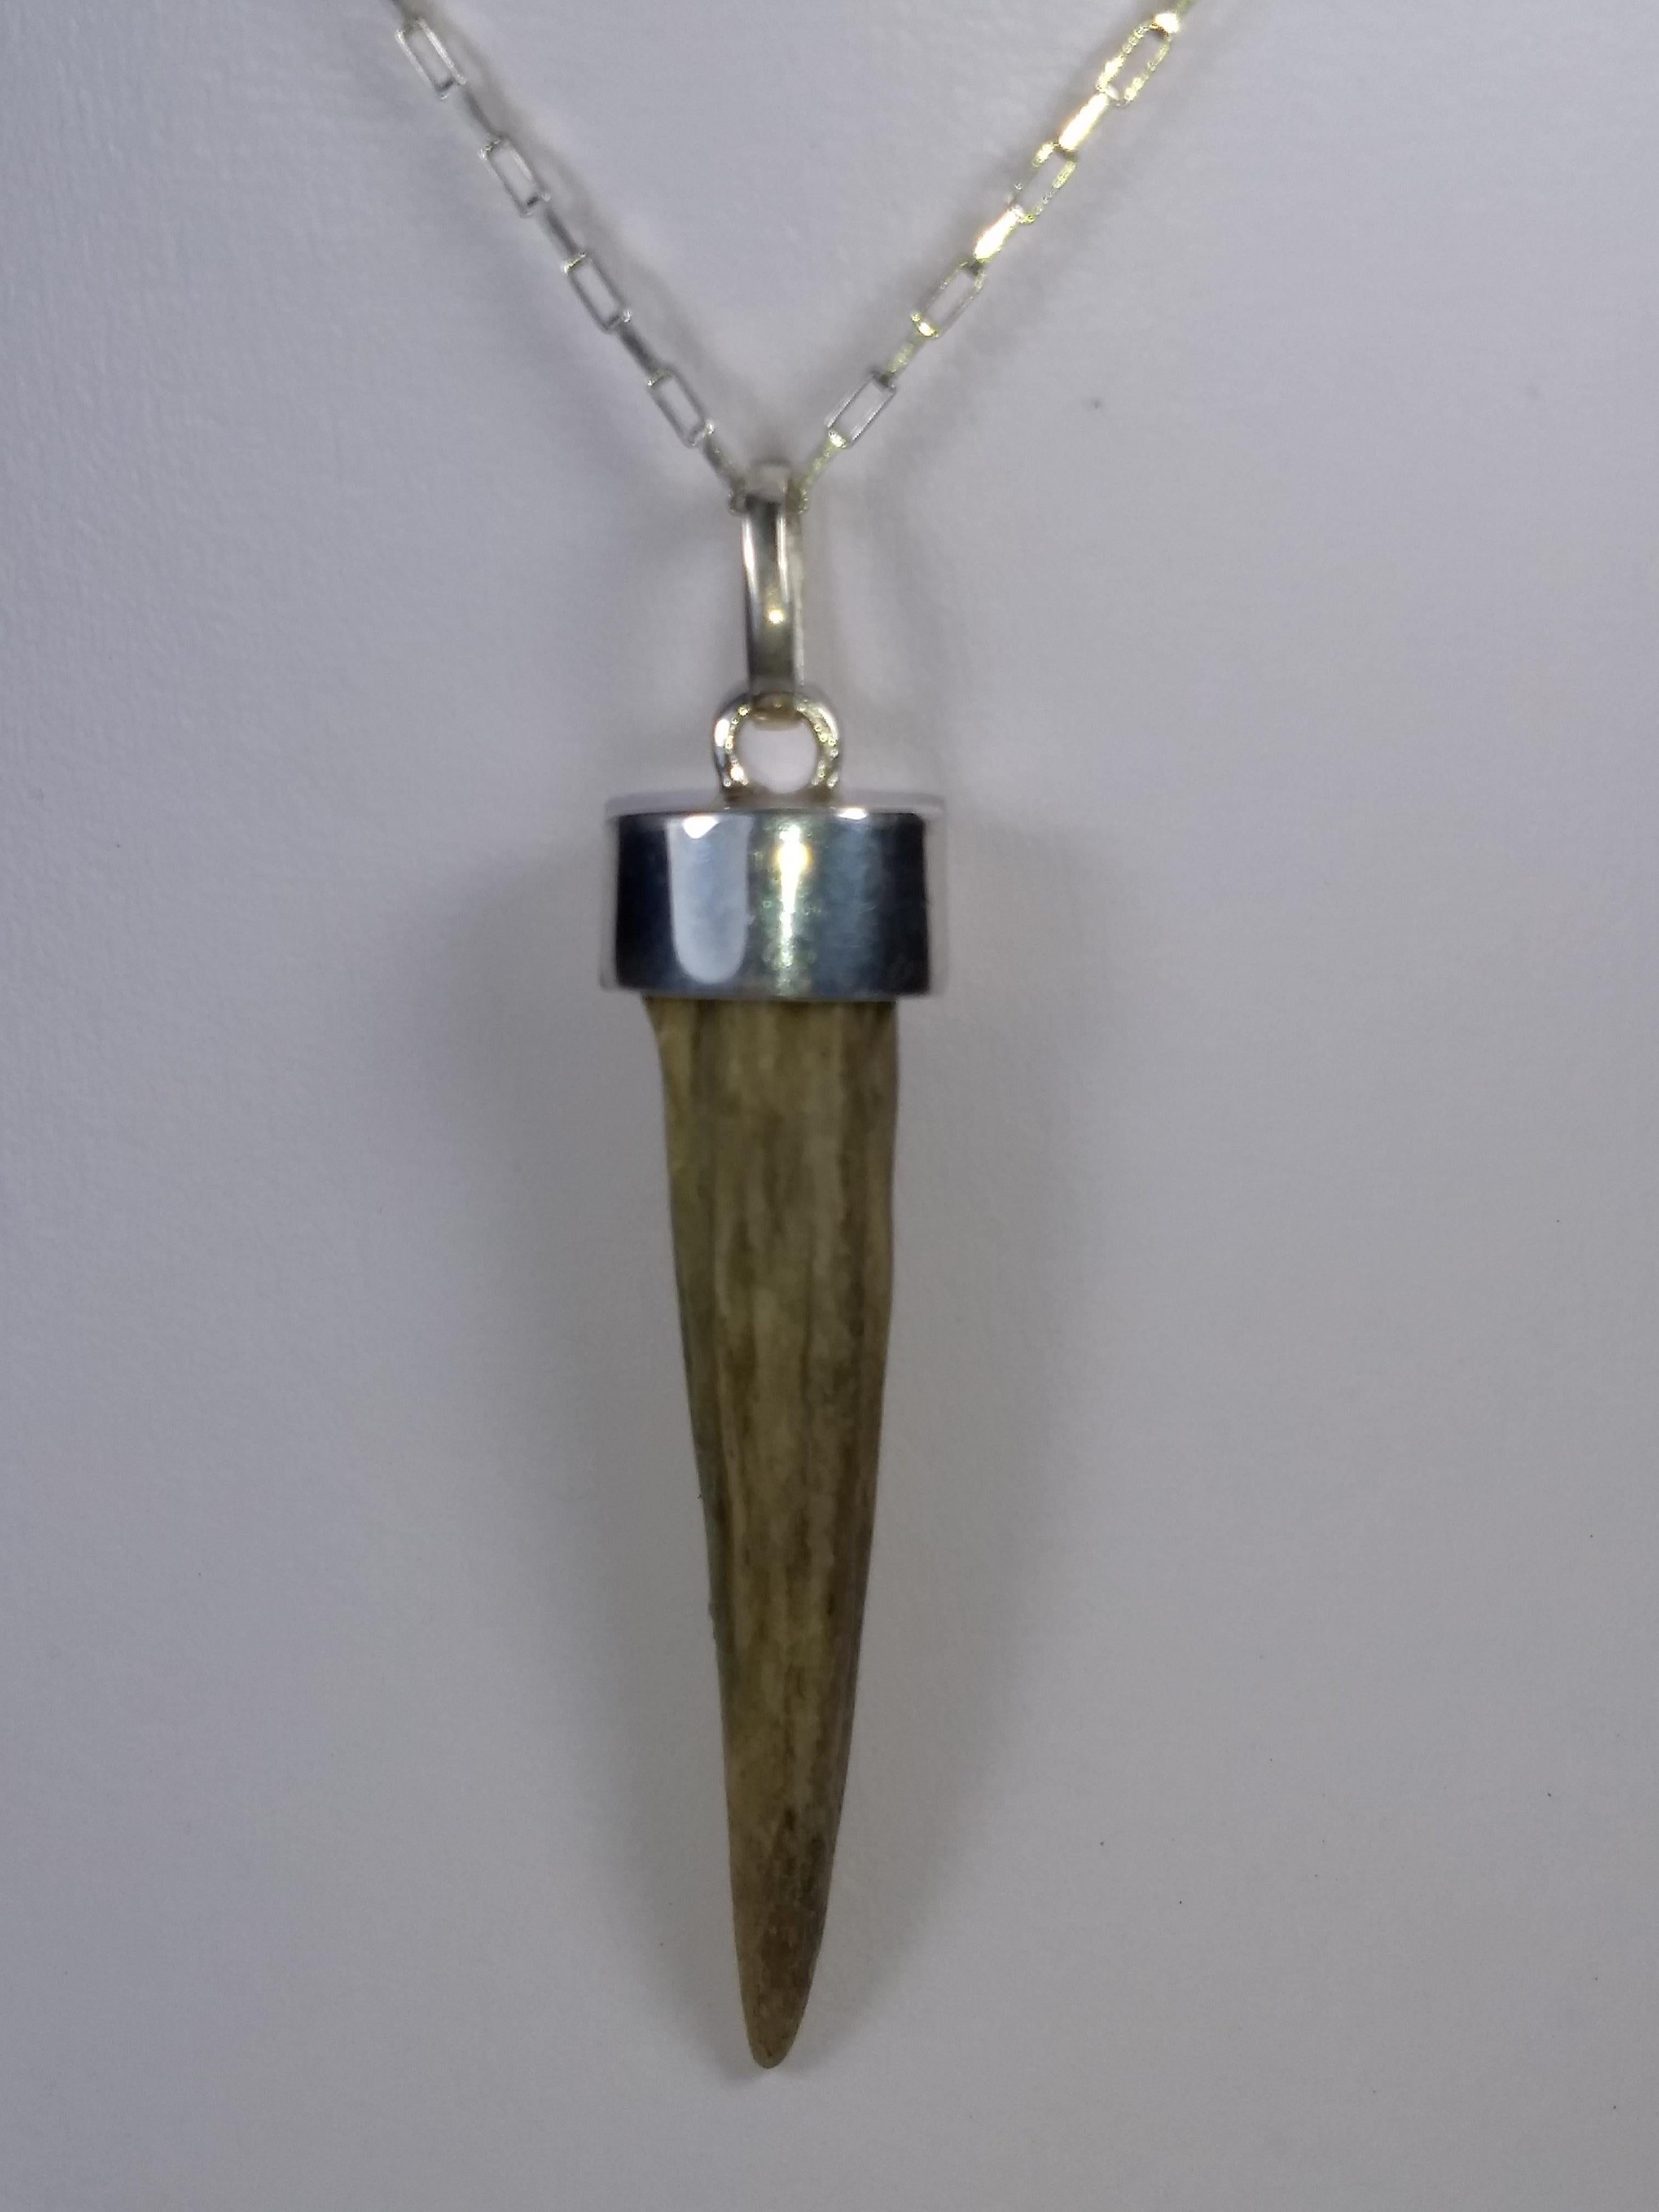 This Alberto Juan one of a kind necklace was handmade using a wild deer antler horn and sterling silver. The chain and findings used in this piece are sterling silver. Necklace measures 17.5